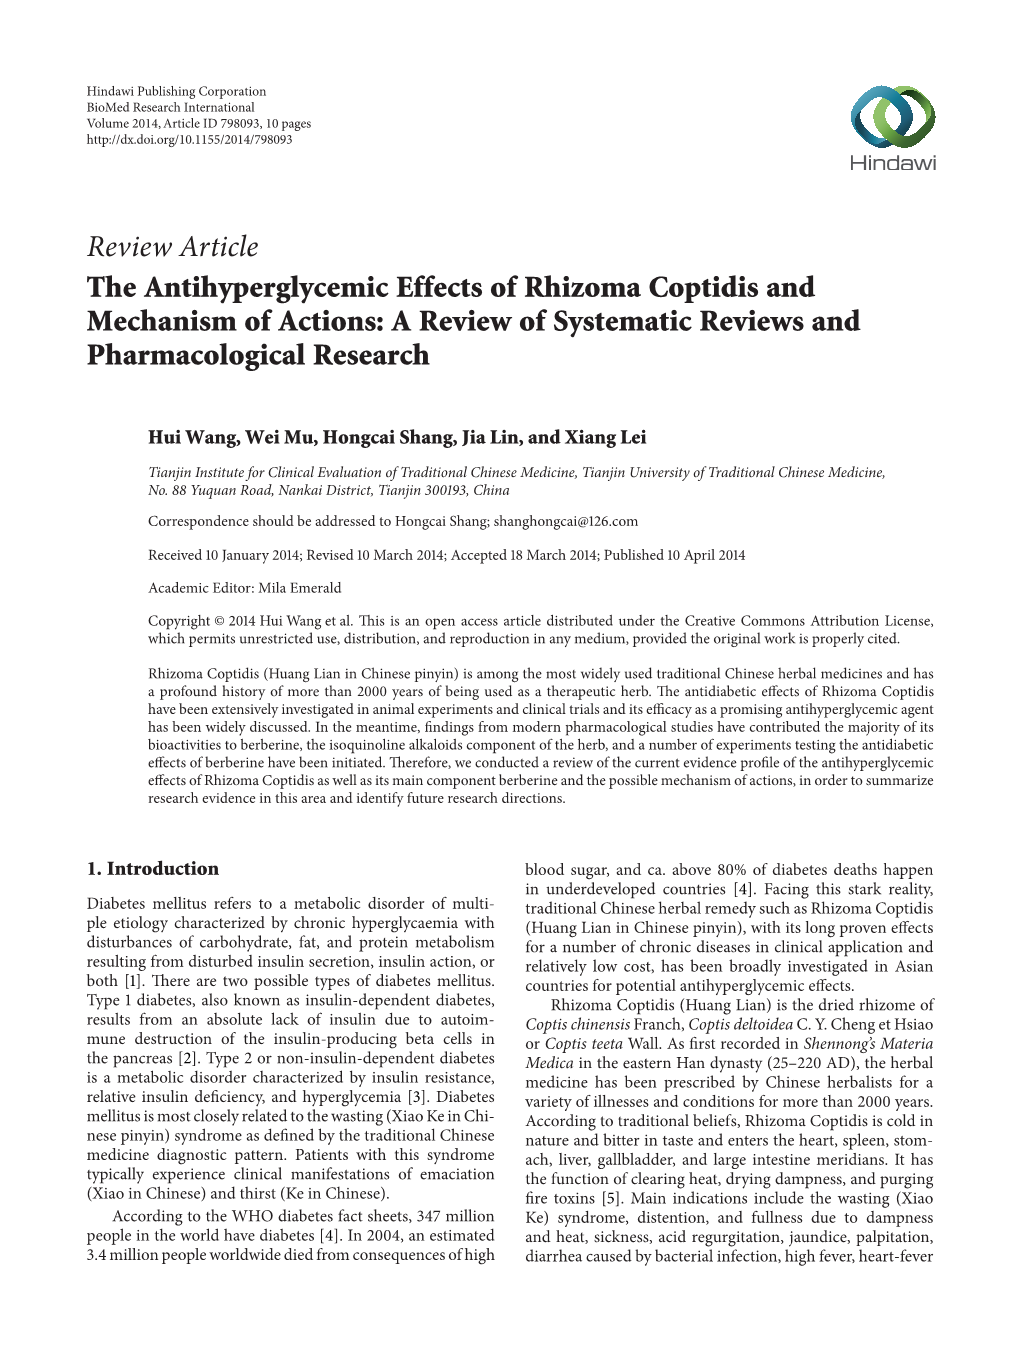 The Antihyperglycemic Effects of Rhizoma Coptidis and Mechanism of Actions: a Review of Systematic Reviews and Pharmacological Research